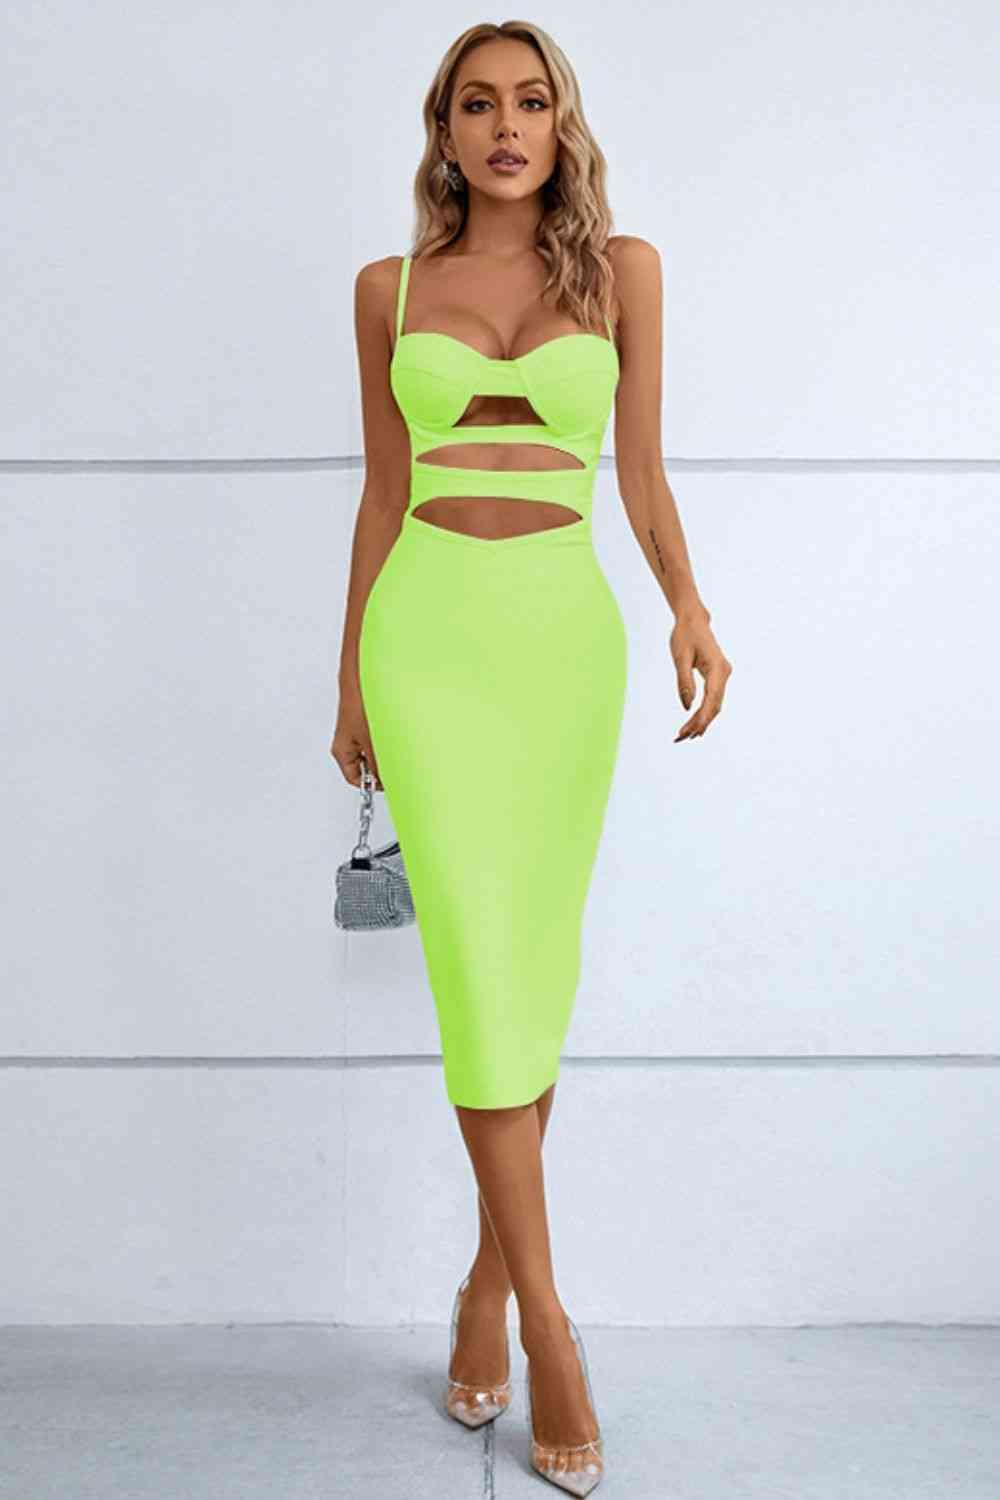 a woman in a neon green dress